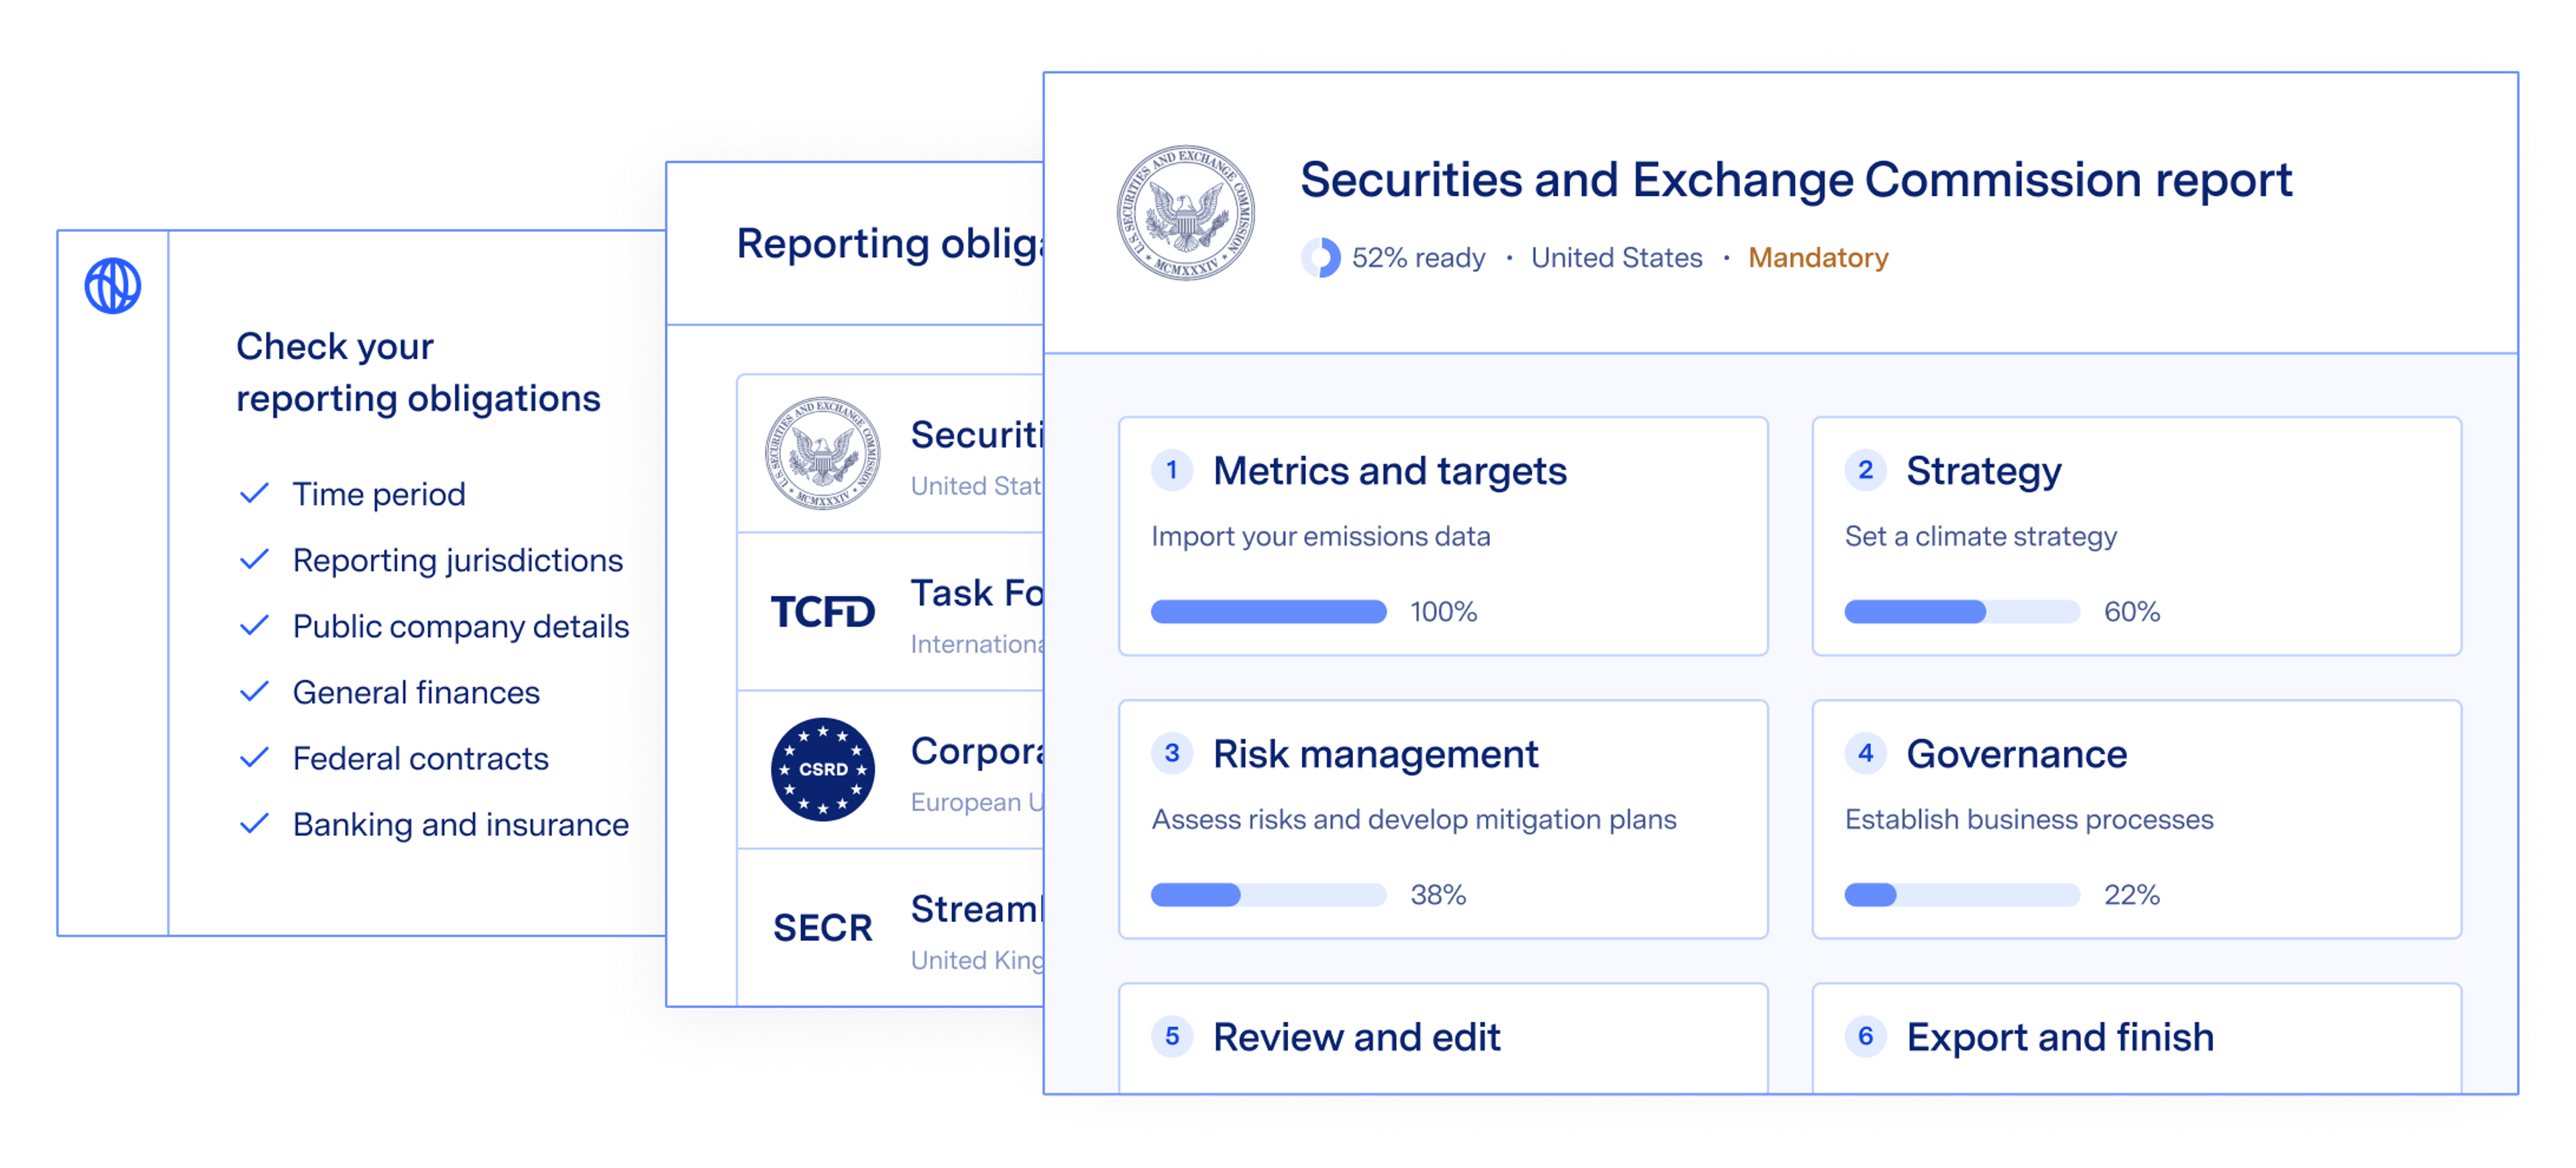 Animated screenshot of product showing reporting obligations and SEC report